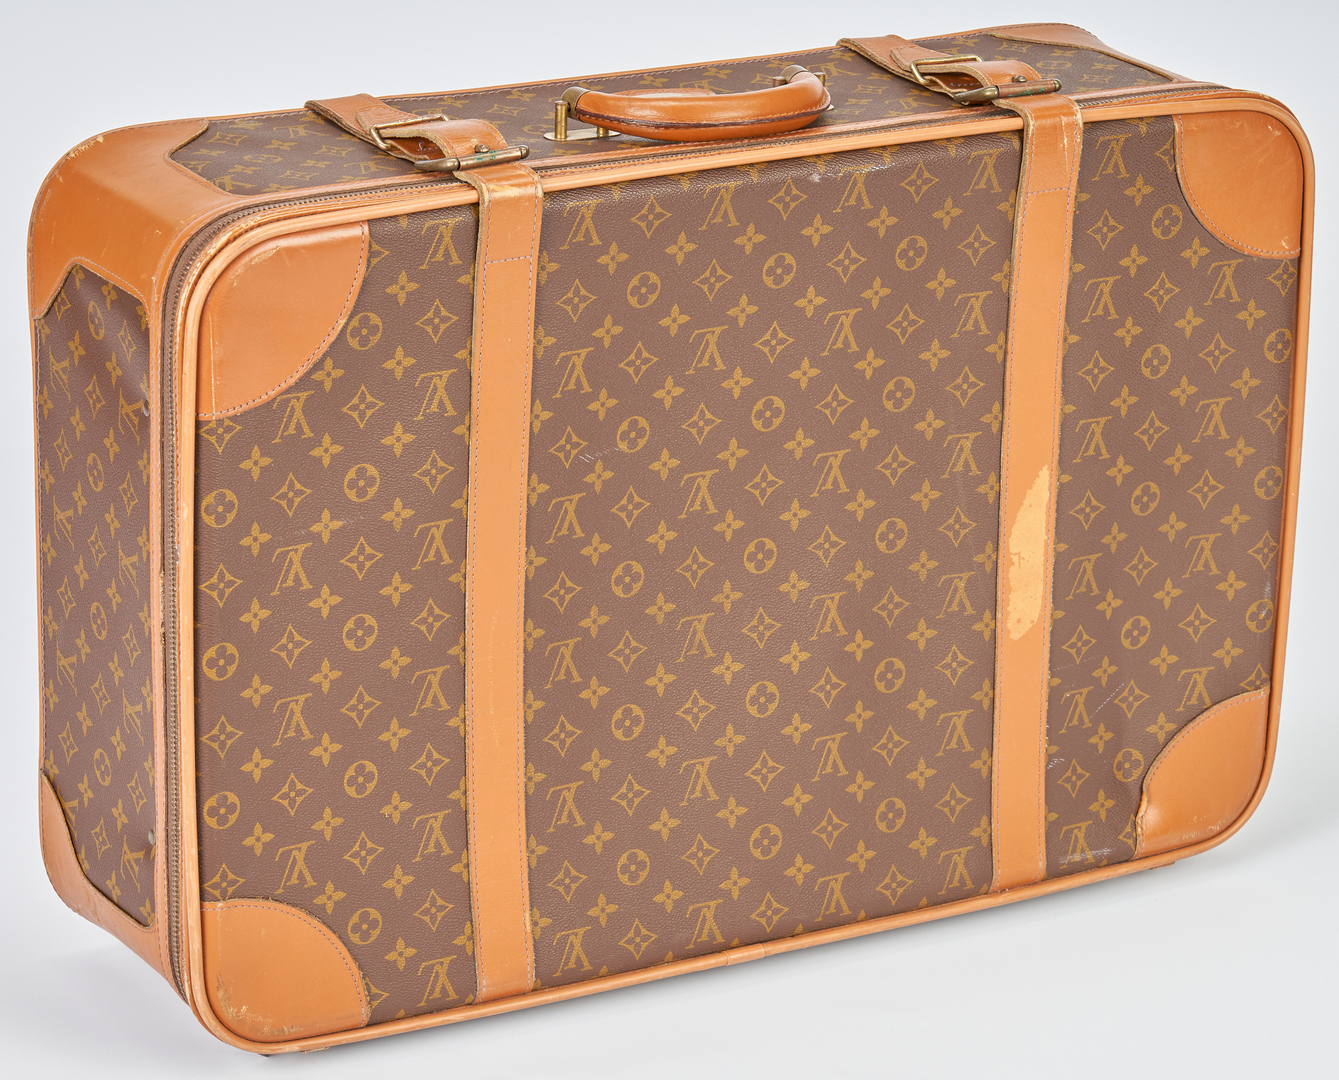 Lot 704: 2 Louis Vuitton Luggage Items